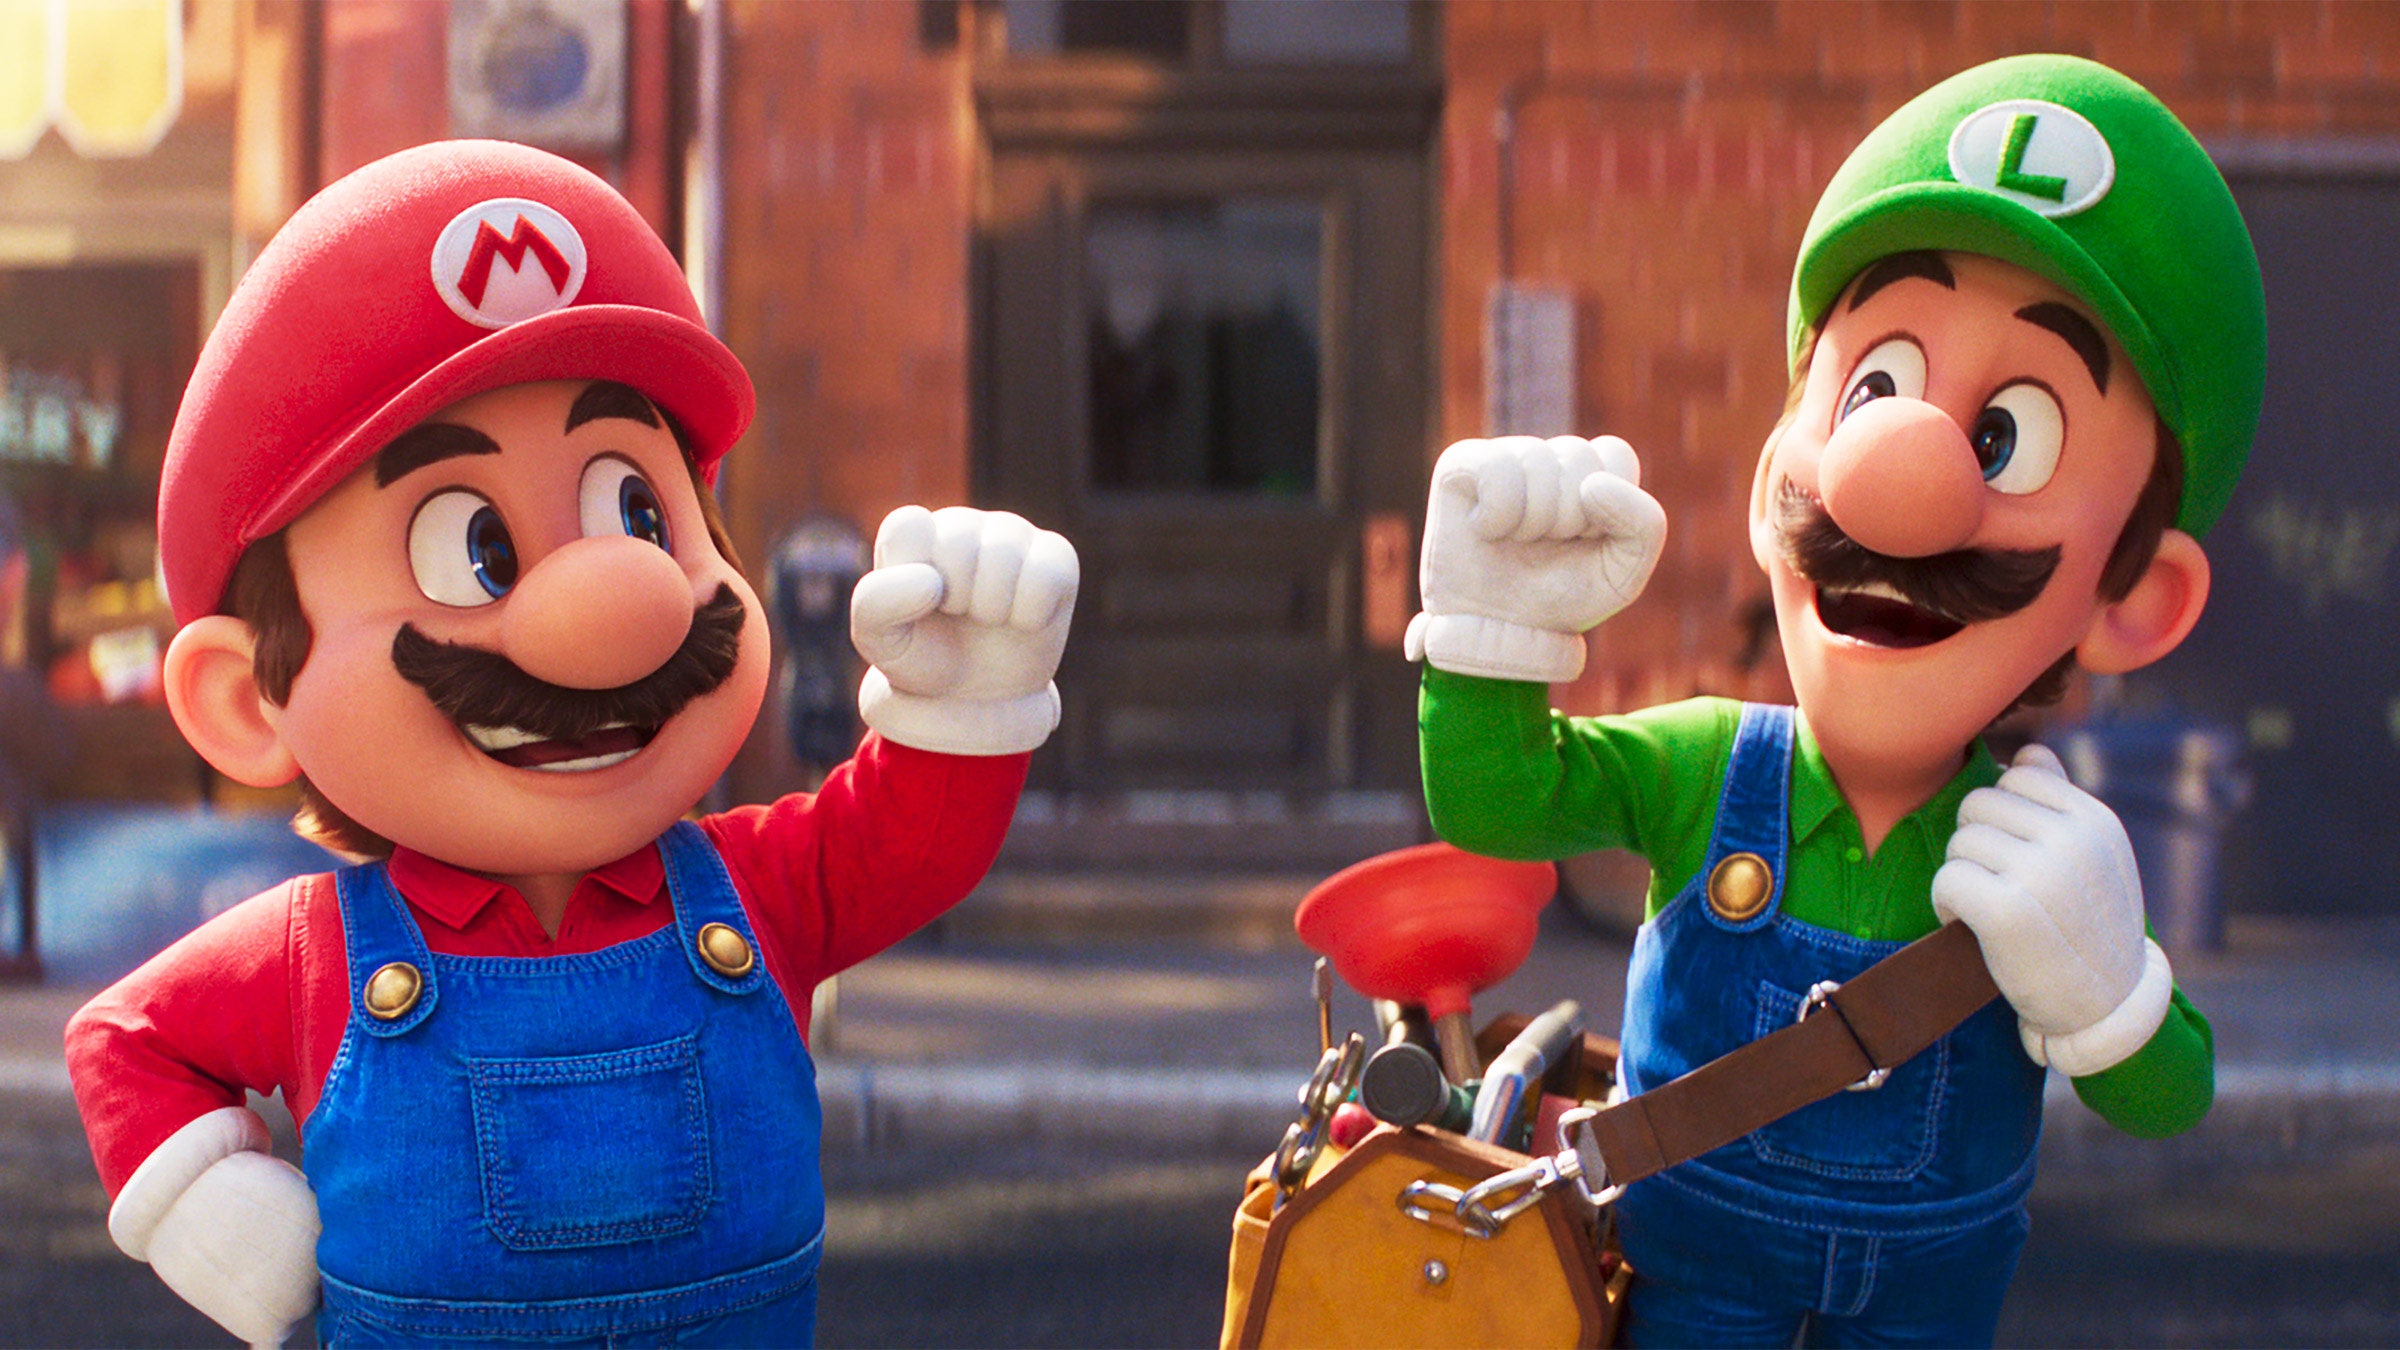 "The Super Mario Bros. Movie" has become the highest-grossing video game adaptation in history and the first film of 2023 to gross $1 billion at the global box office